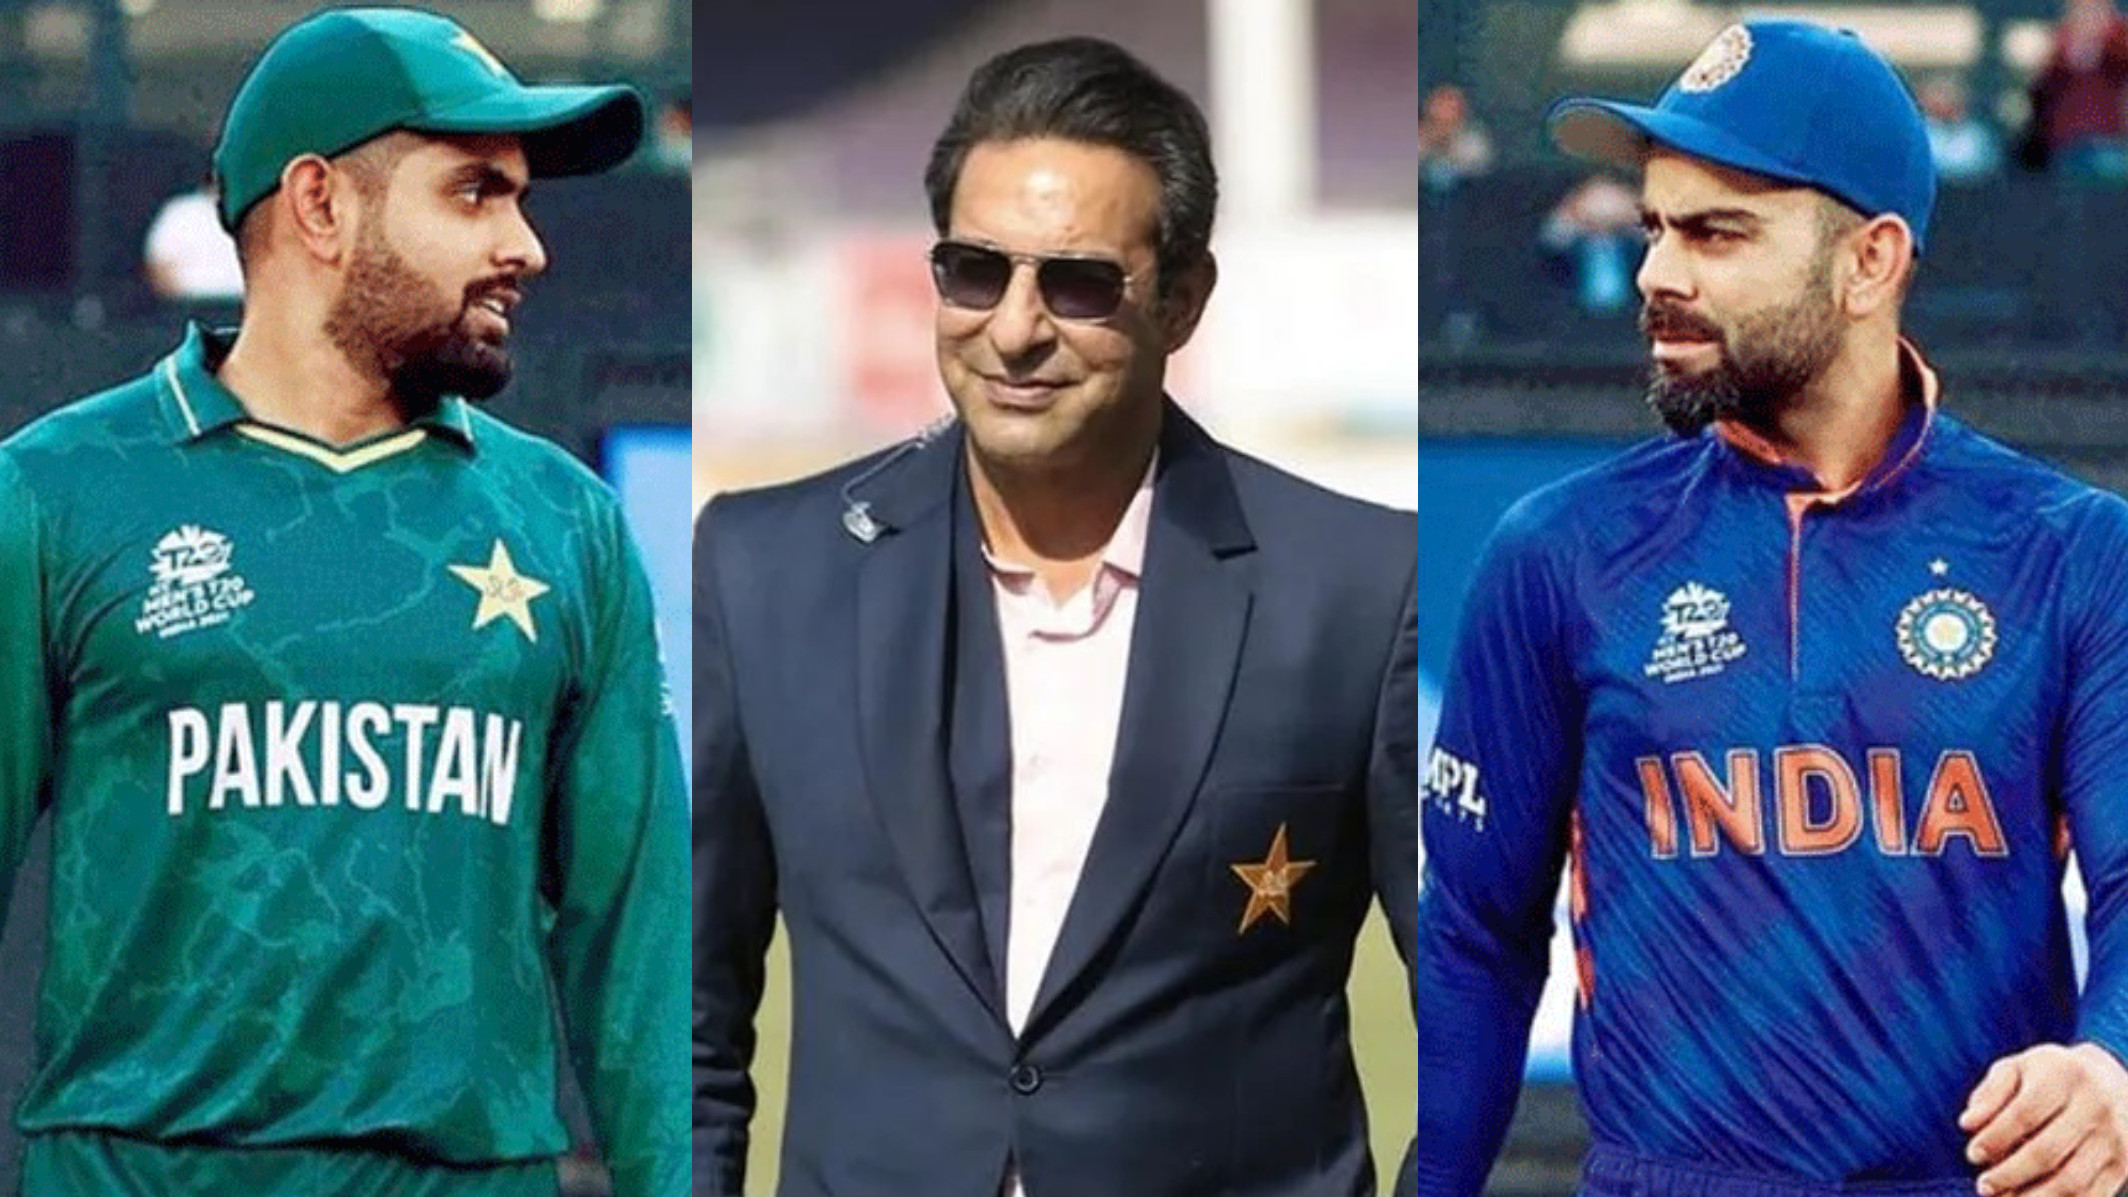 Asia Cup 2022: “A bit too early”- Wasim Akram on Babar Azam being compared with Virat Kohli